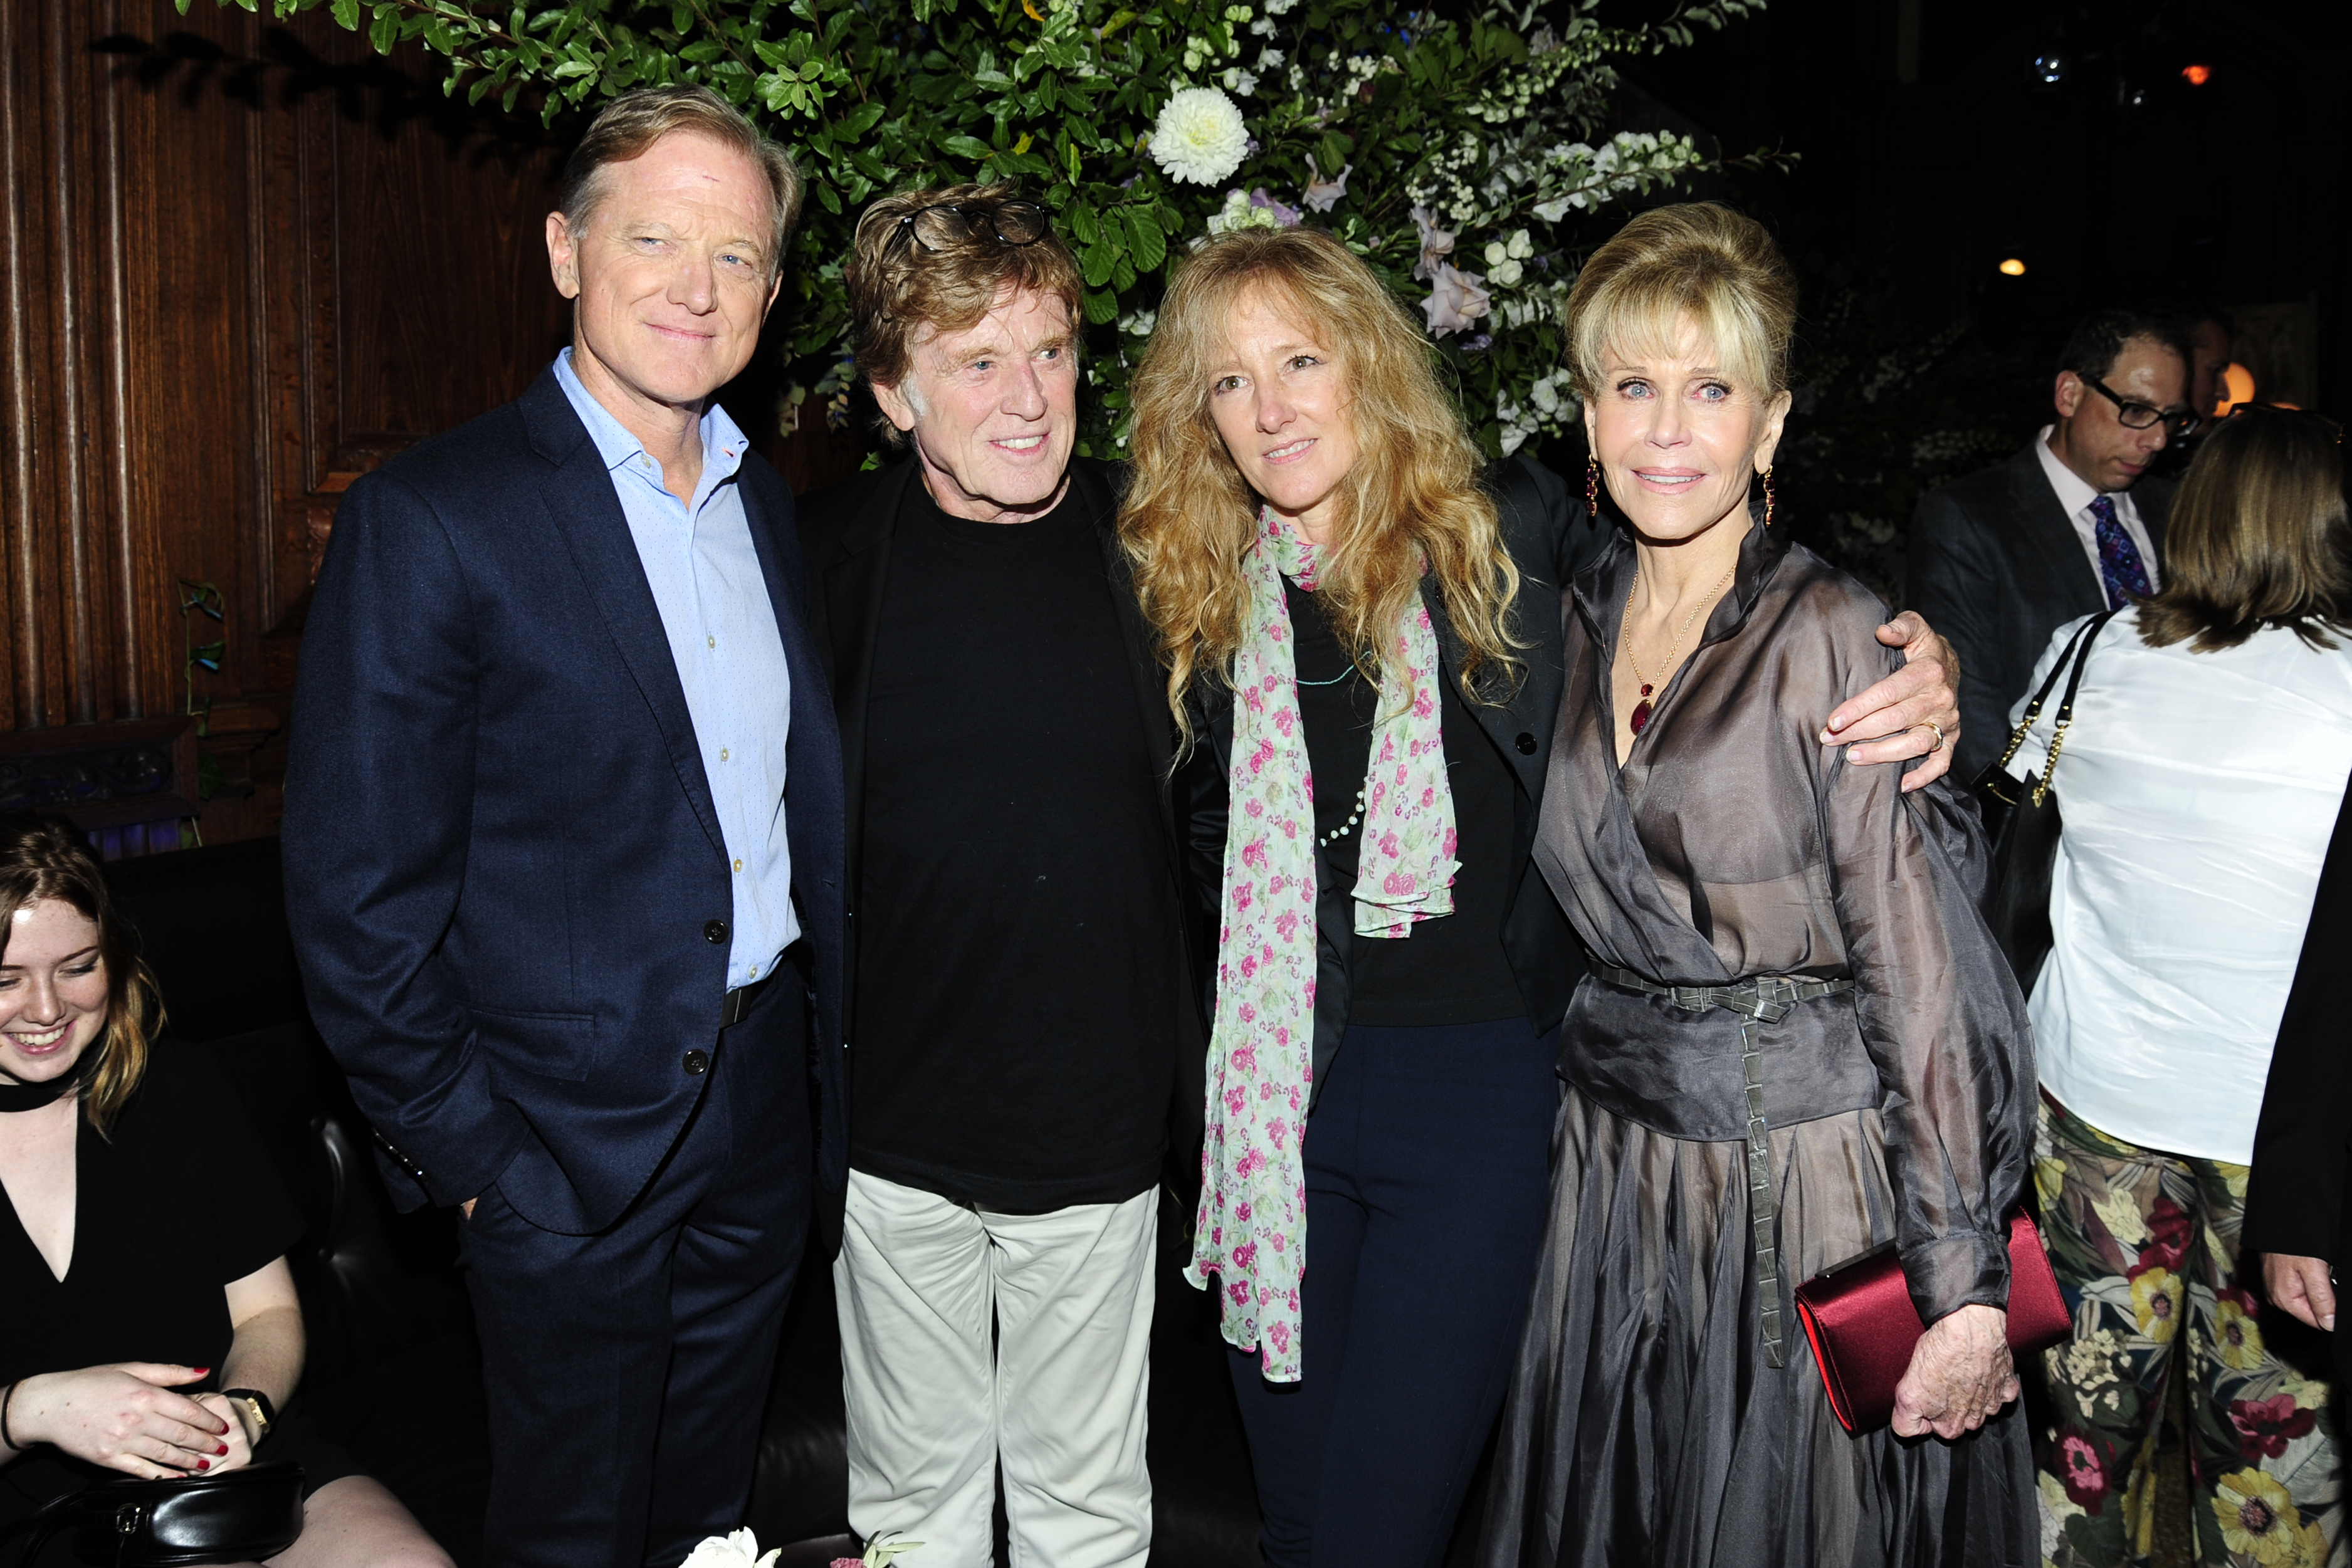 James Redford, Robert Redford, Shauna Redford, and Jane Fonda attend Netflix's after-party for the premiere of "Our Souls at Night" at The Plaza Hotel on September 27, 2017, in New York City. | Source: Getty Images